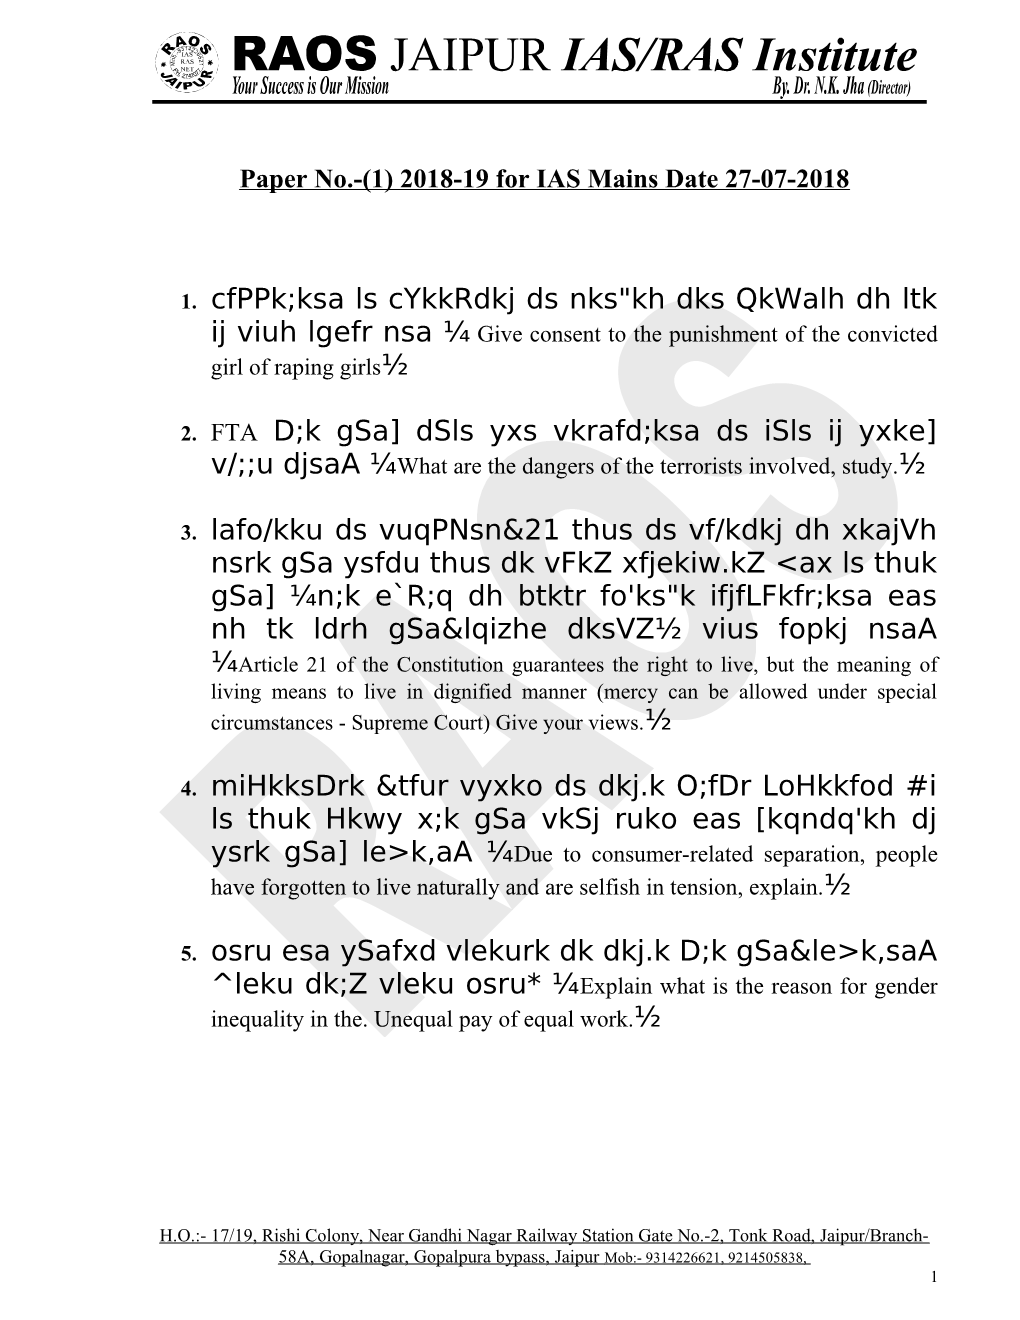 Paper No.-(1) 2018-19 for IAS Mains Date 27-07-2018